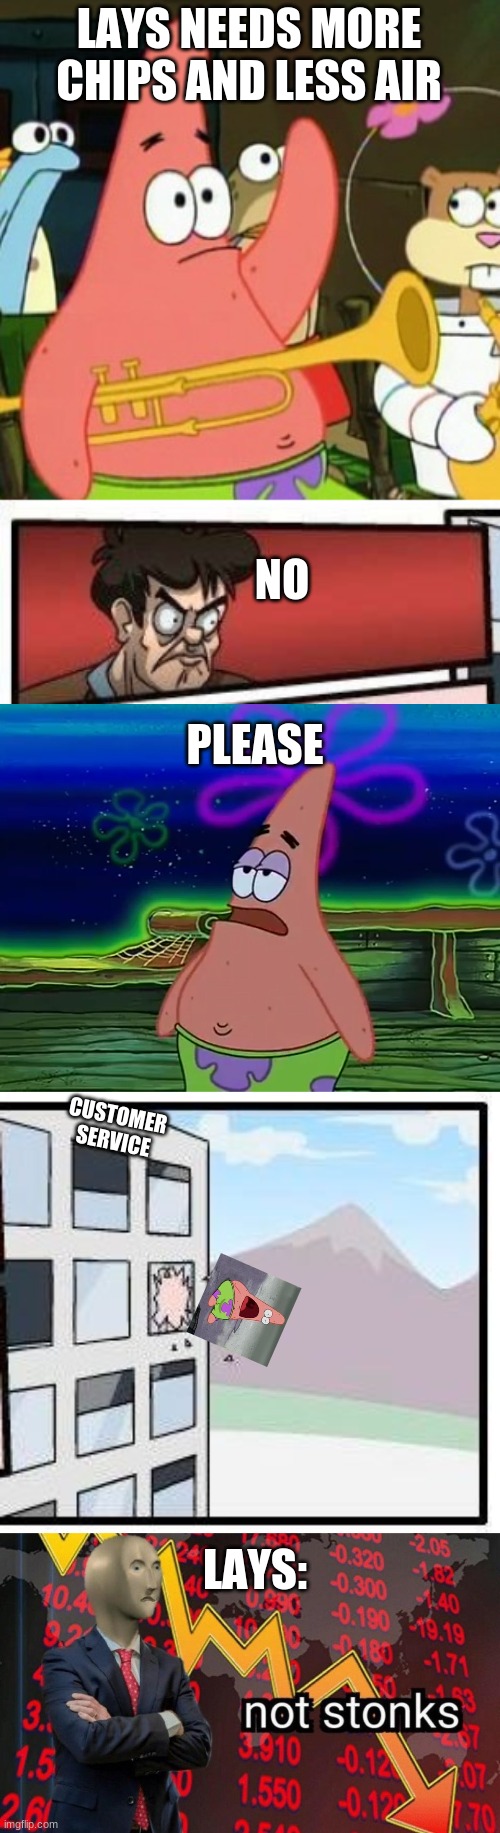 LAYS NEEDS MORE CHIPS AND LESS AIR; NO; PLEASE; CUSTOMER SERVICE; LAYS: | image tagged in memes,no patrick,boardroom meeting suggestion,patrick star take it or leave,not stonks | made w/ Imgflip meme maker